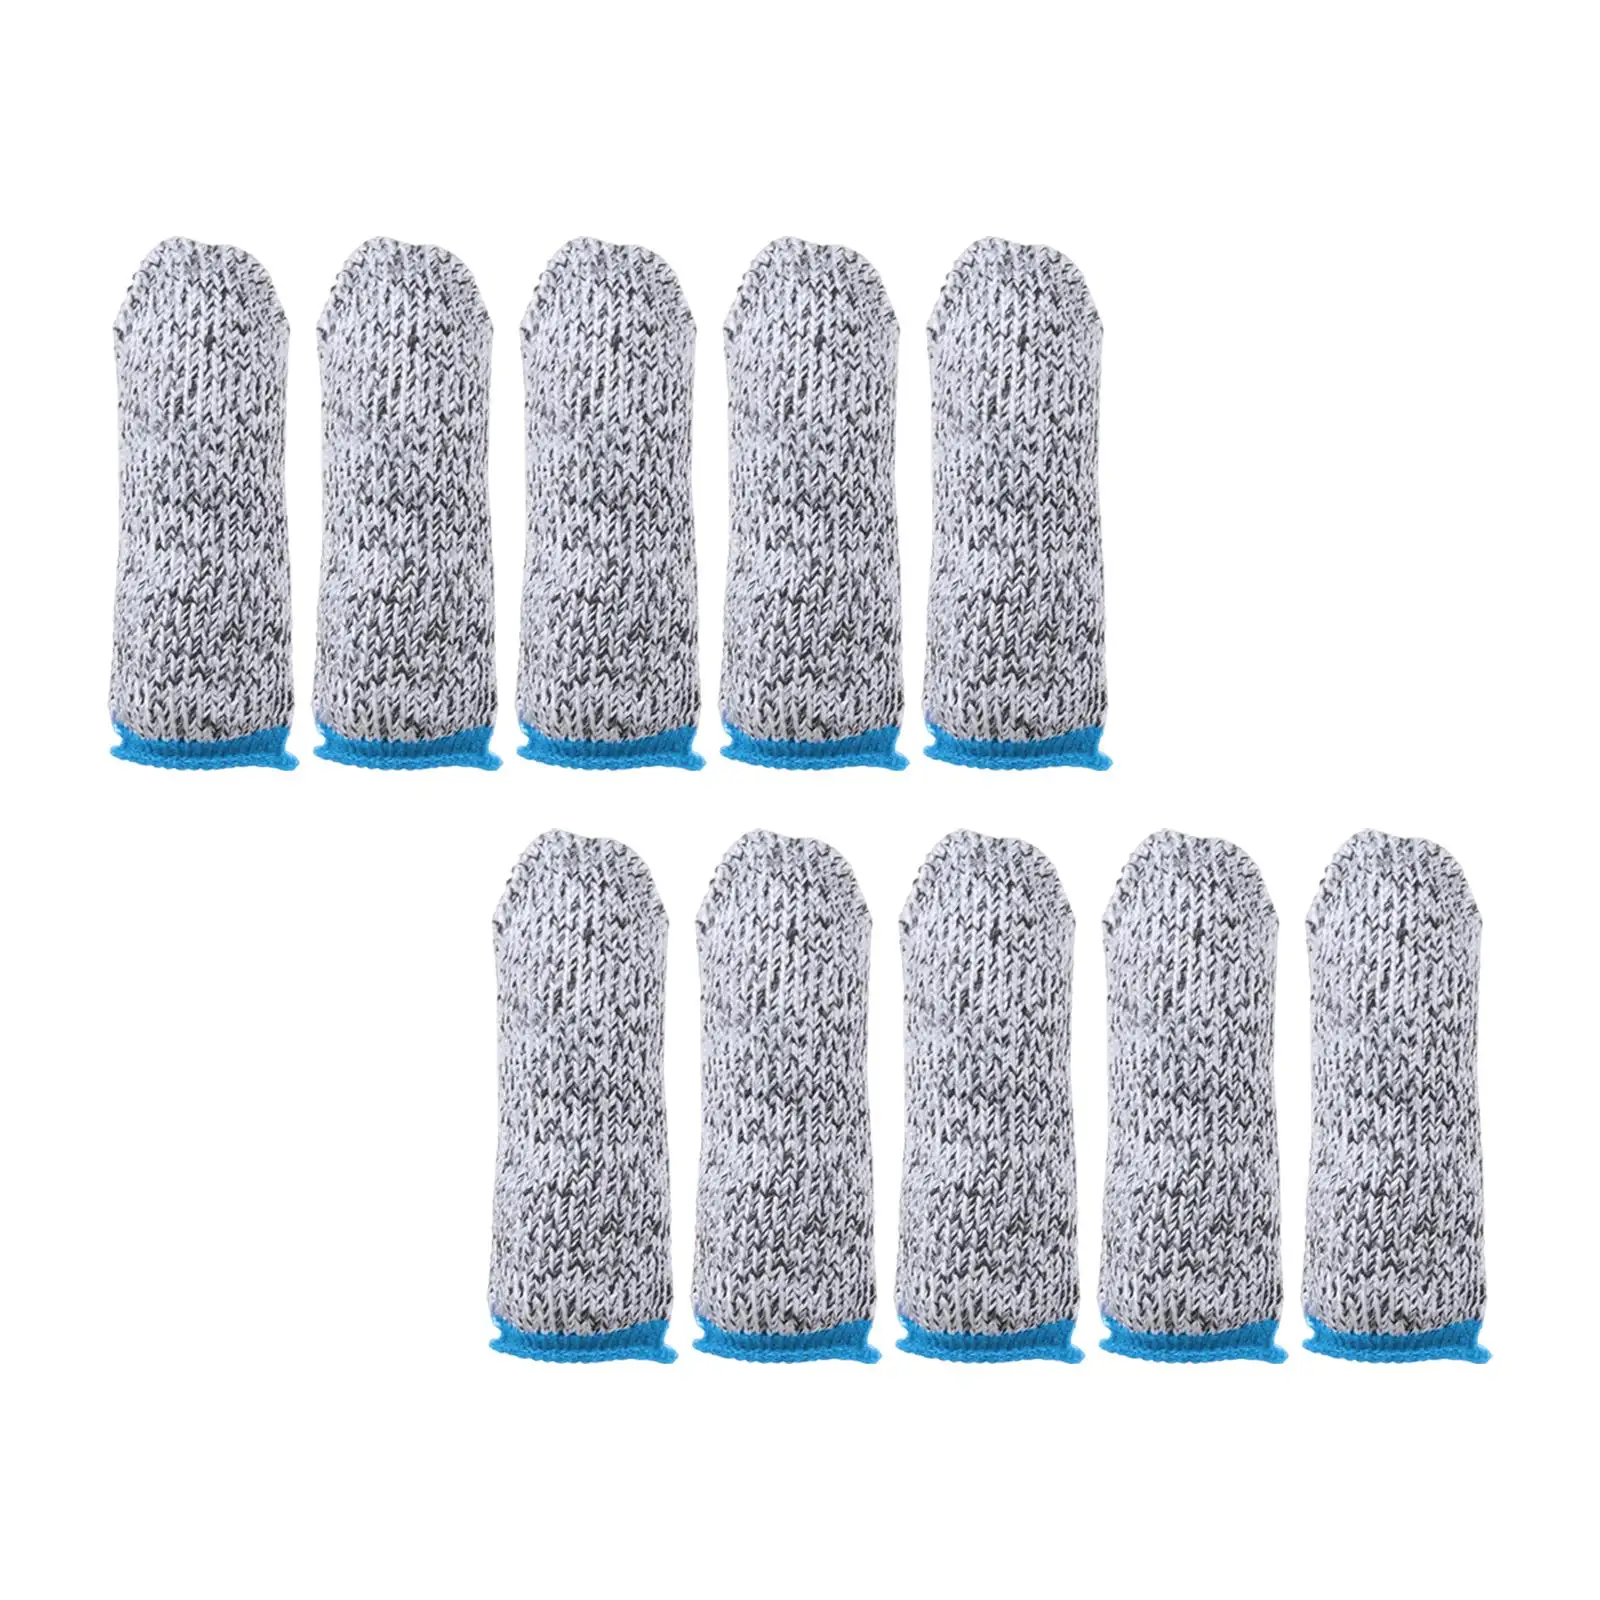 10Pcs Finger Thumb Cots Protection Breathable Gloves Reusable Comfortable Thumb Protector for Worker Building Repairing Crafting